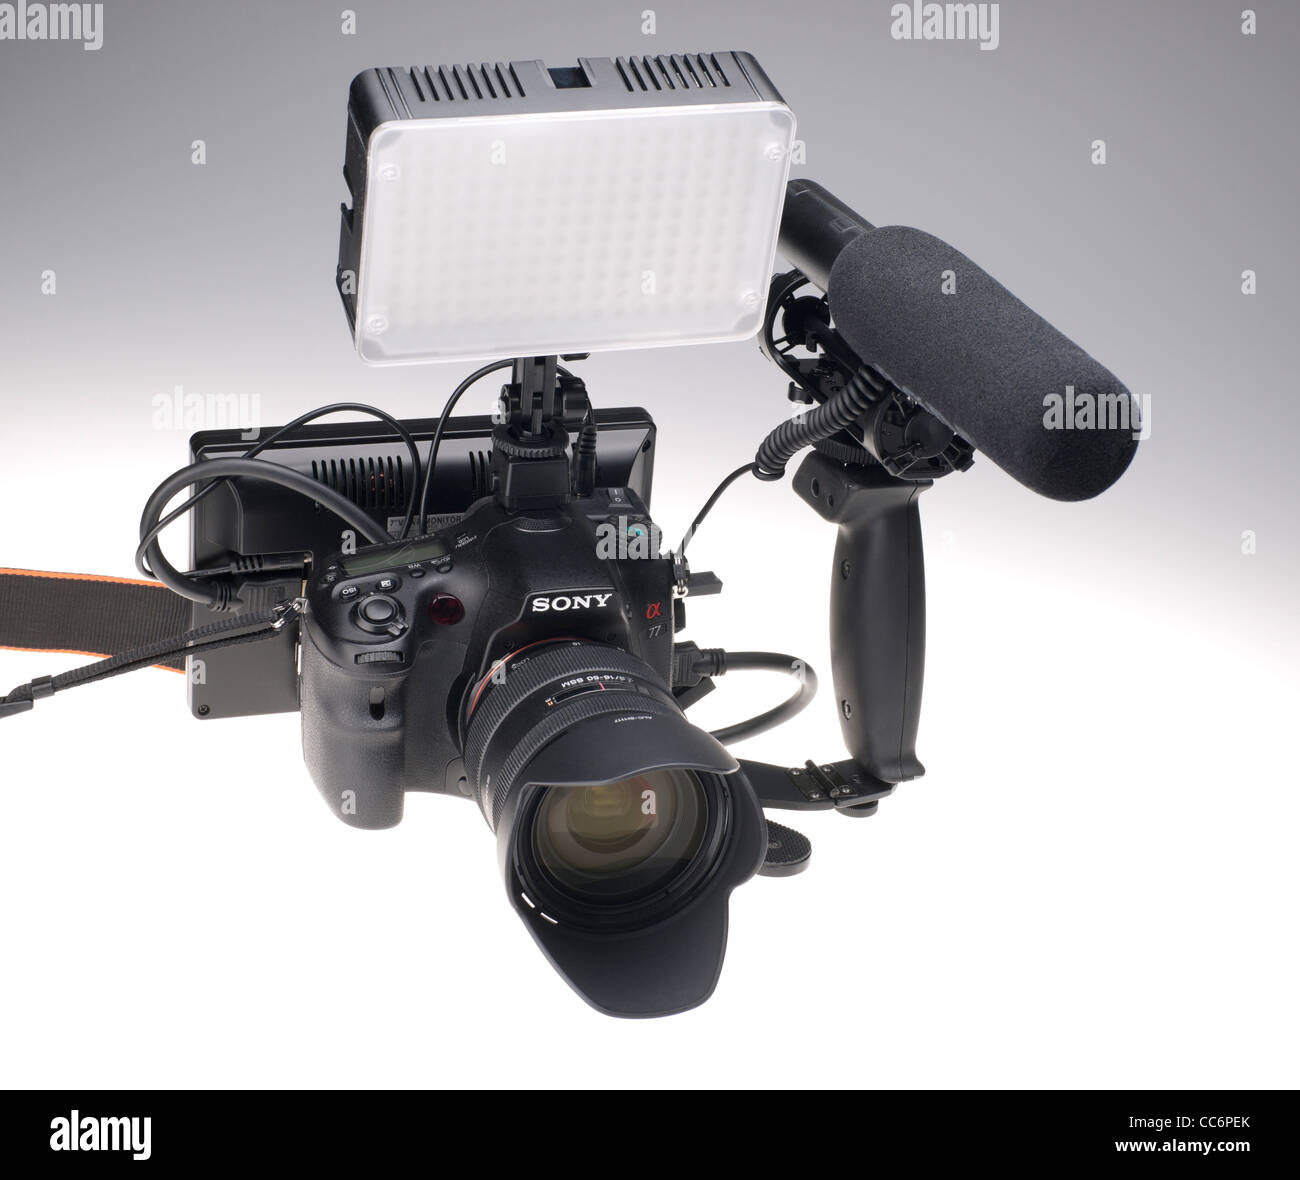 Sony Alpha 77 HD video rig with LED camera top light, Røde VideoMic  microphone, and 7 inch large HD monitor for framing shots Stock Photo -  Alamy